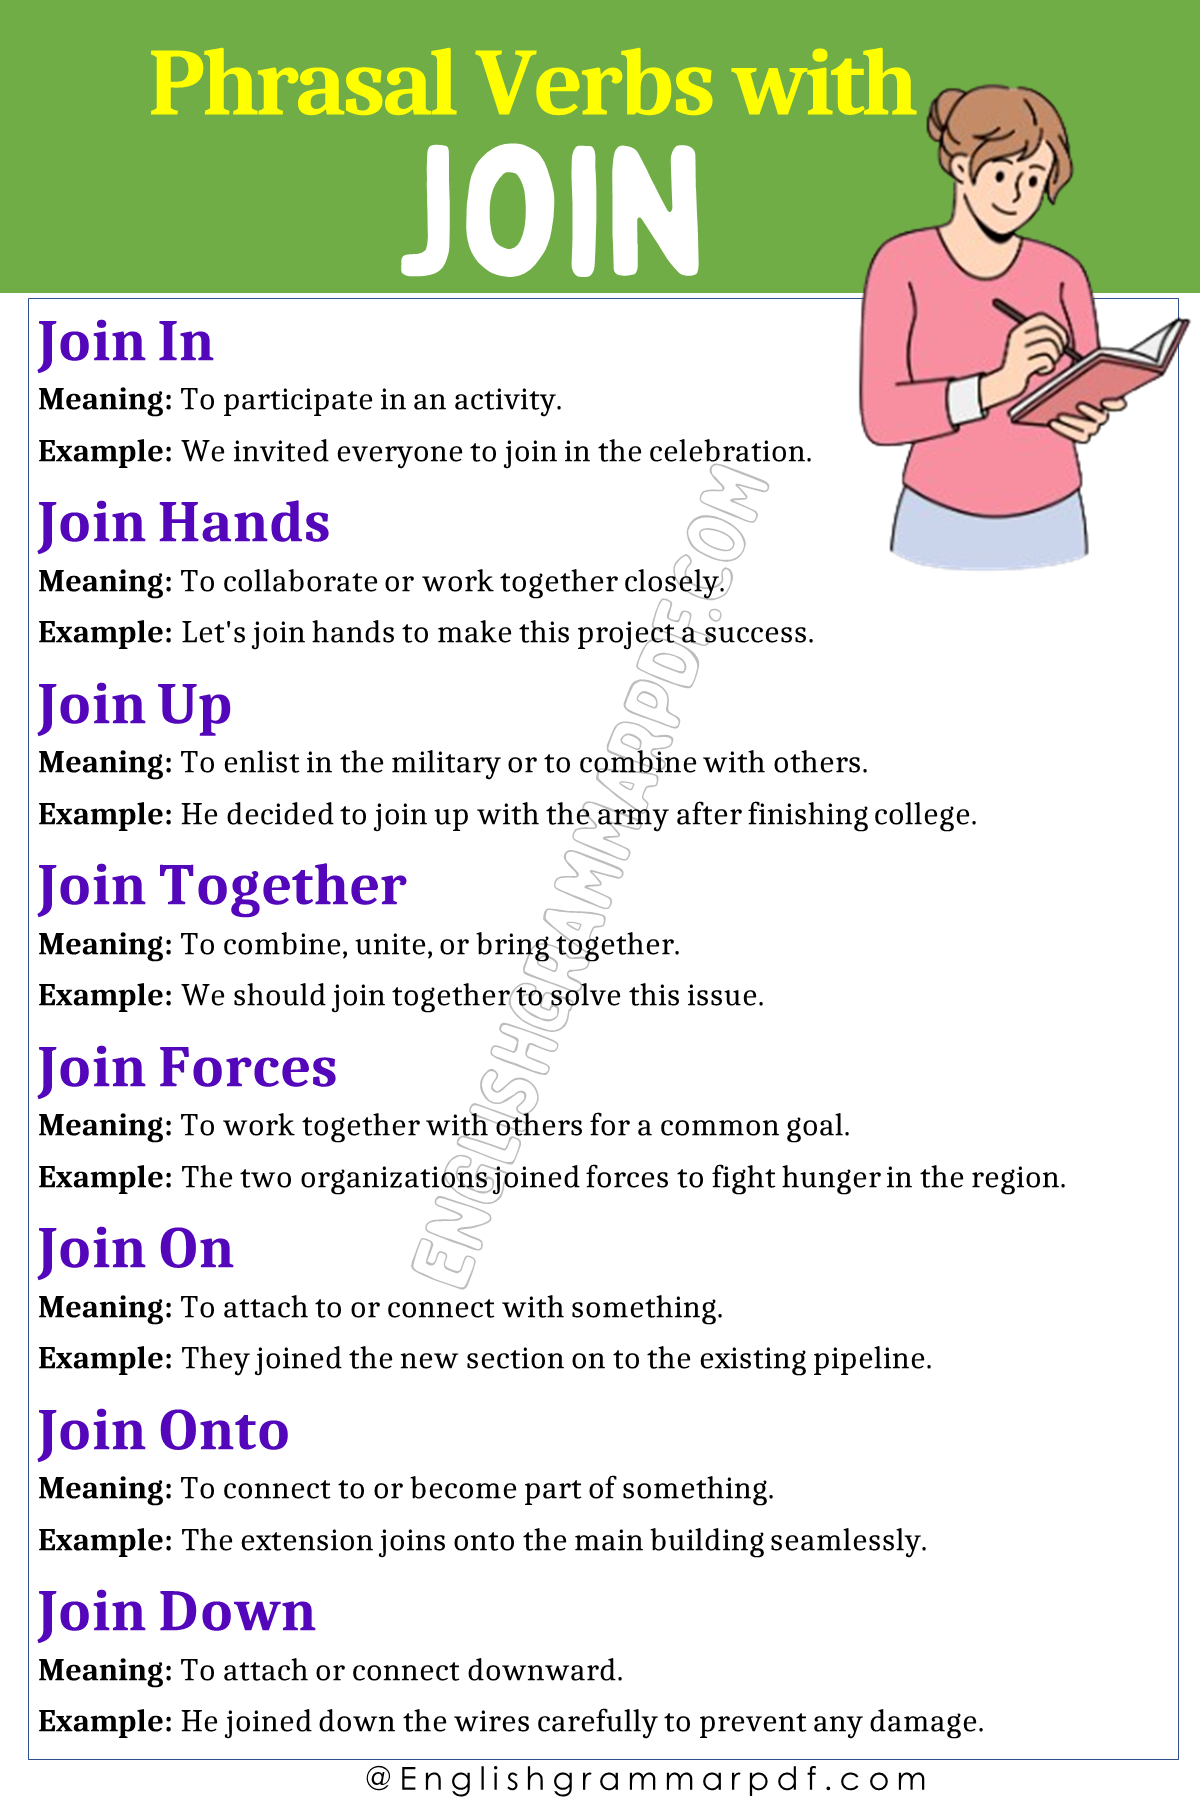 Phrasal Verbs with Join